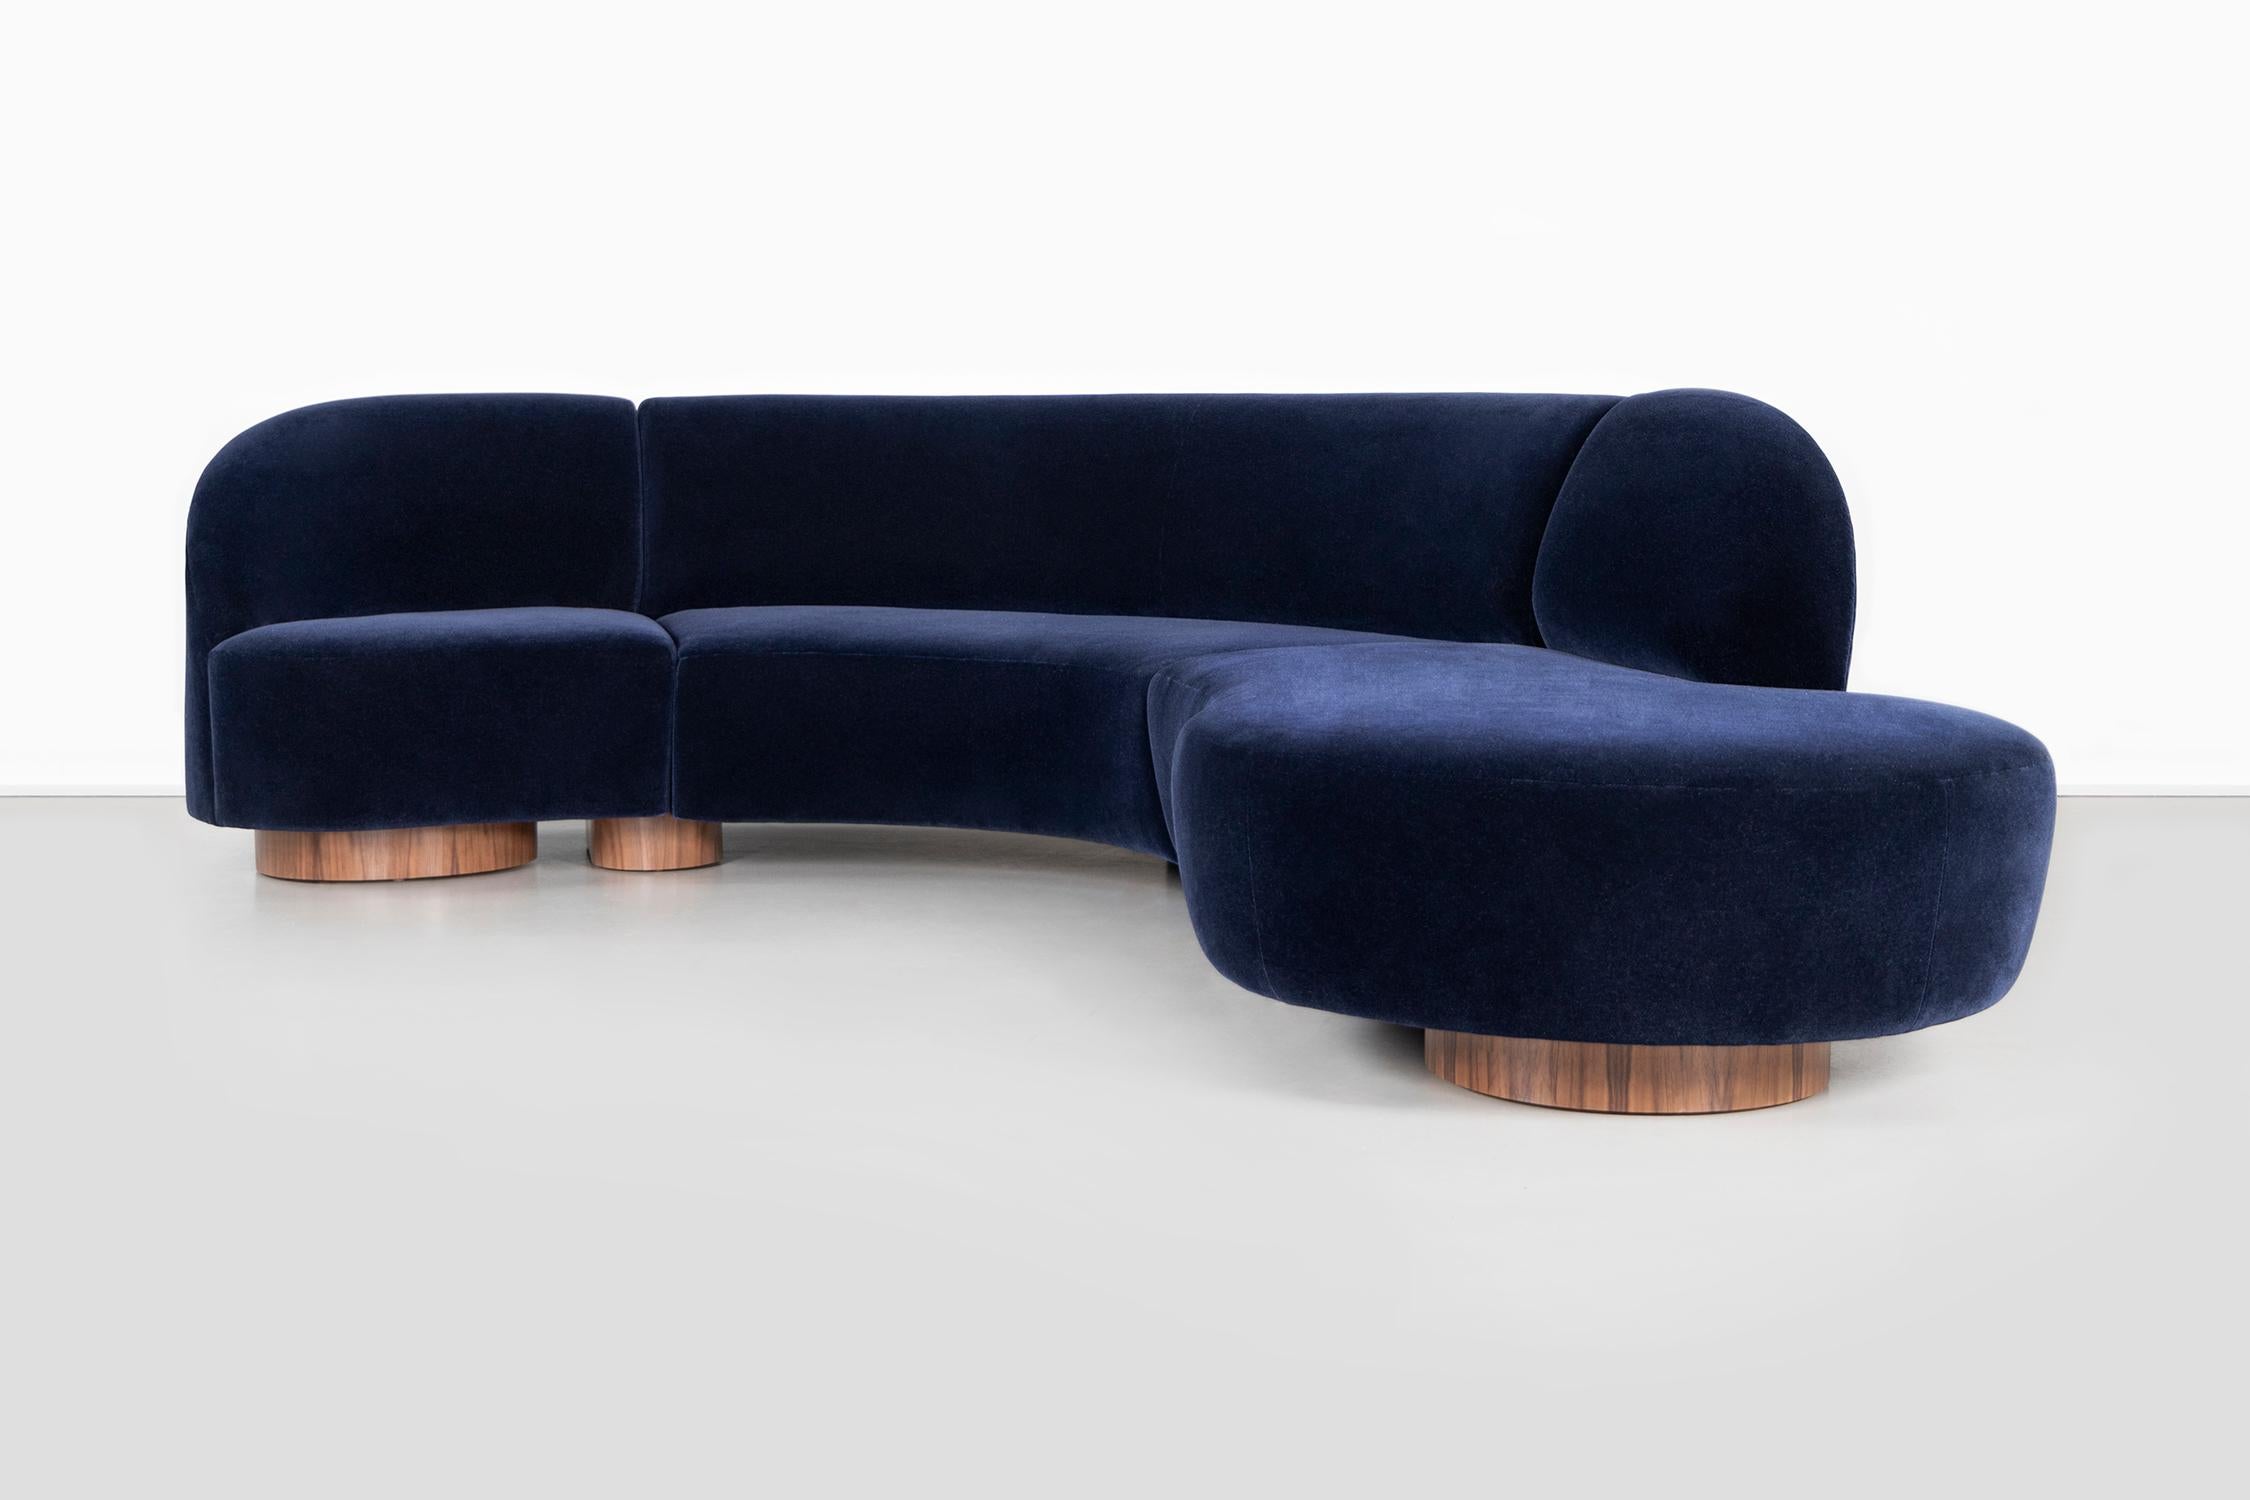 Cloud sectional sofa 

designed by Vladimir Kagan for Directional

USA, circa 1970s

mohair with rosewood bases 

Measures: 32 ½” H x 128 ½” W x 87” D x seat 17 ¼” H.